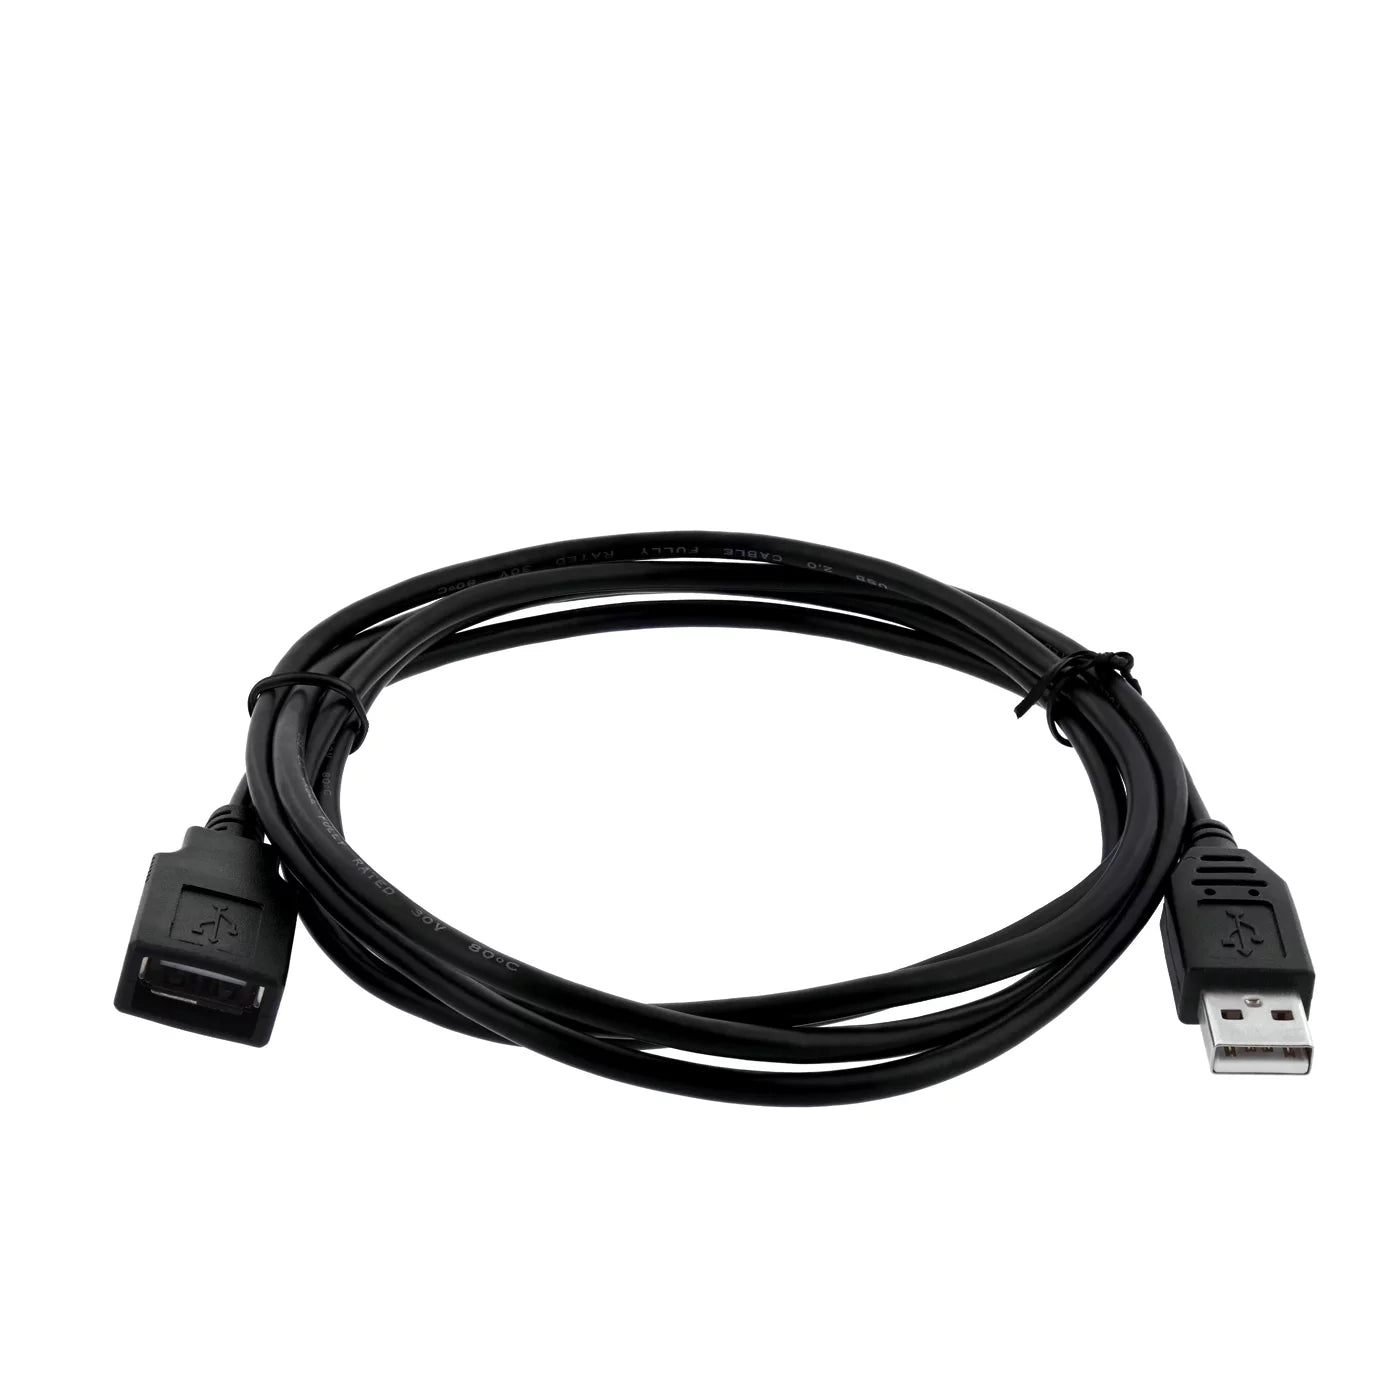 Usb male to female extension cable 1.5 meter-black